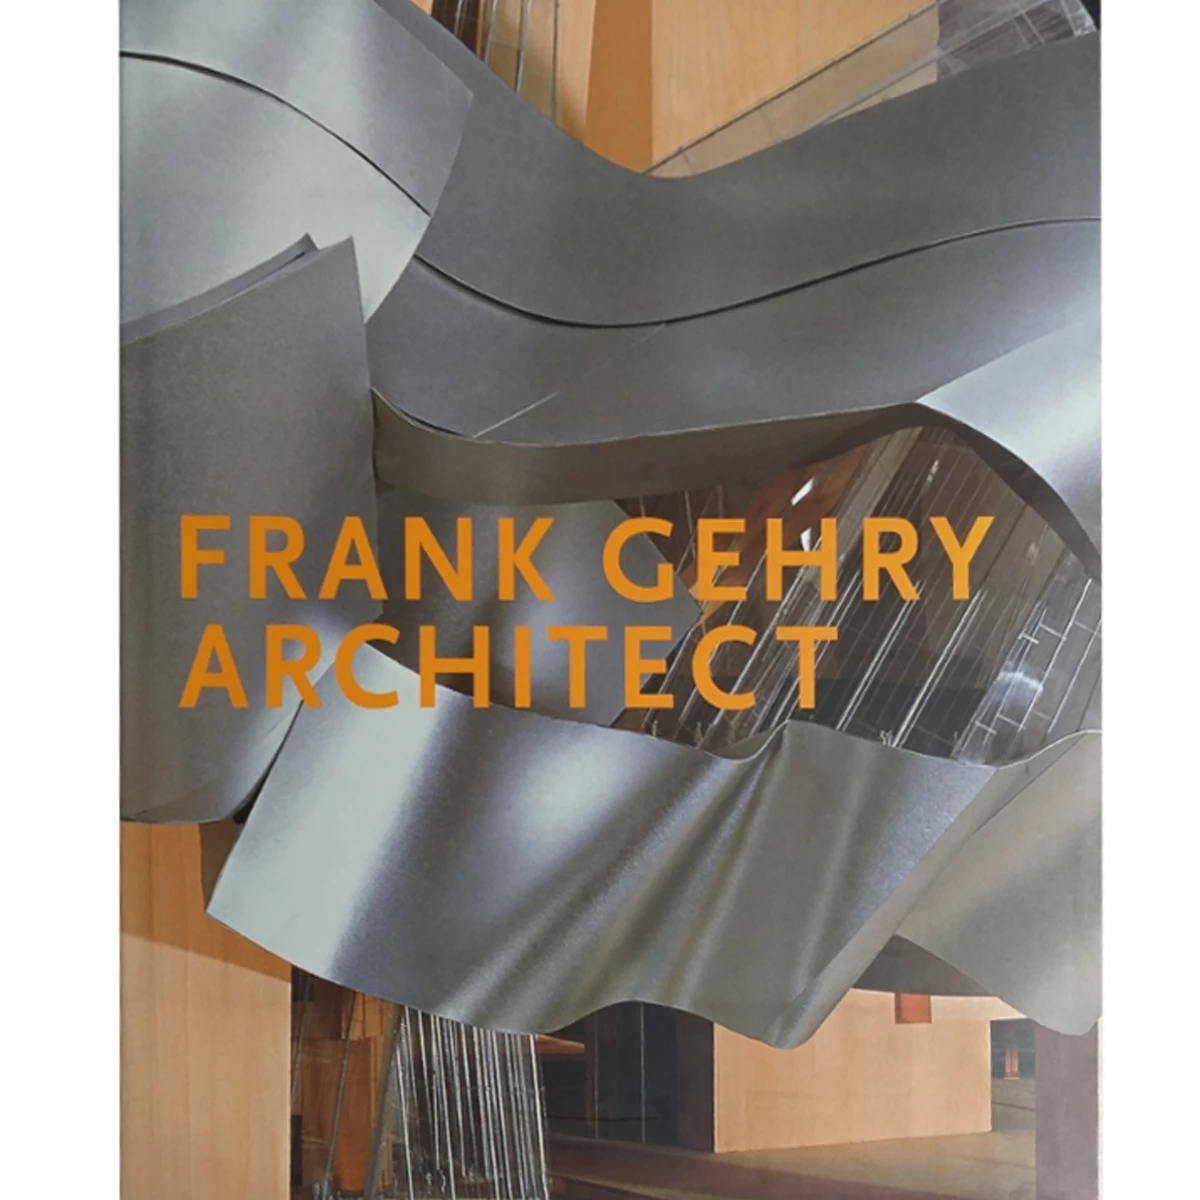 Frank Gehry arquitect